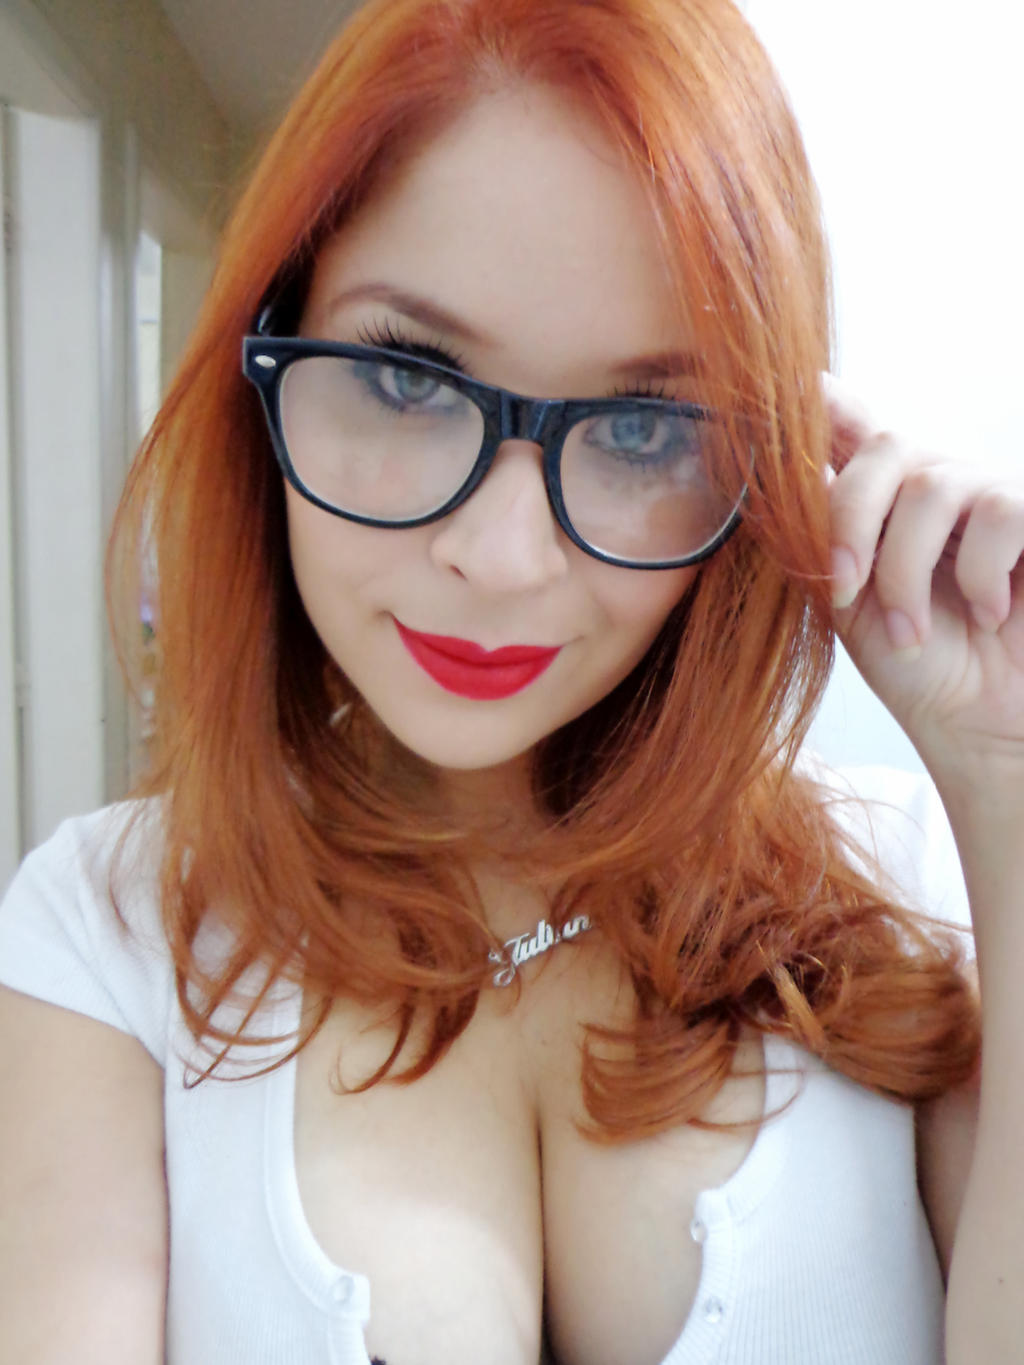 Mature Redhead With Glasses 42